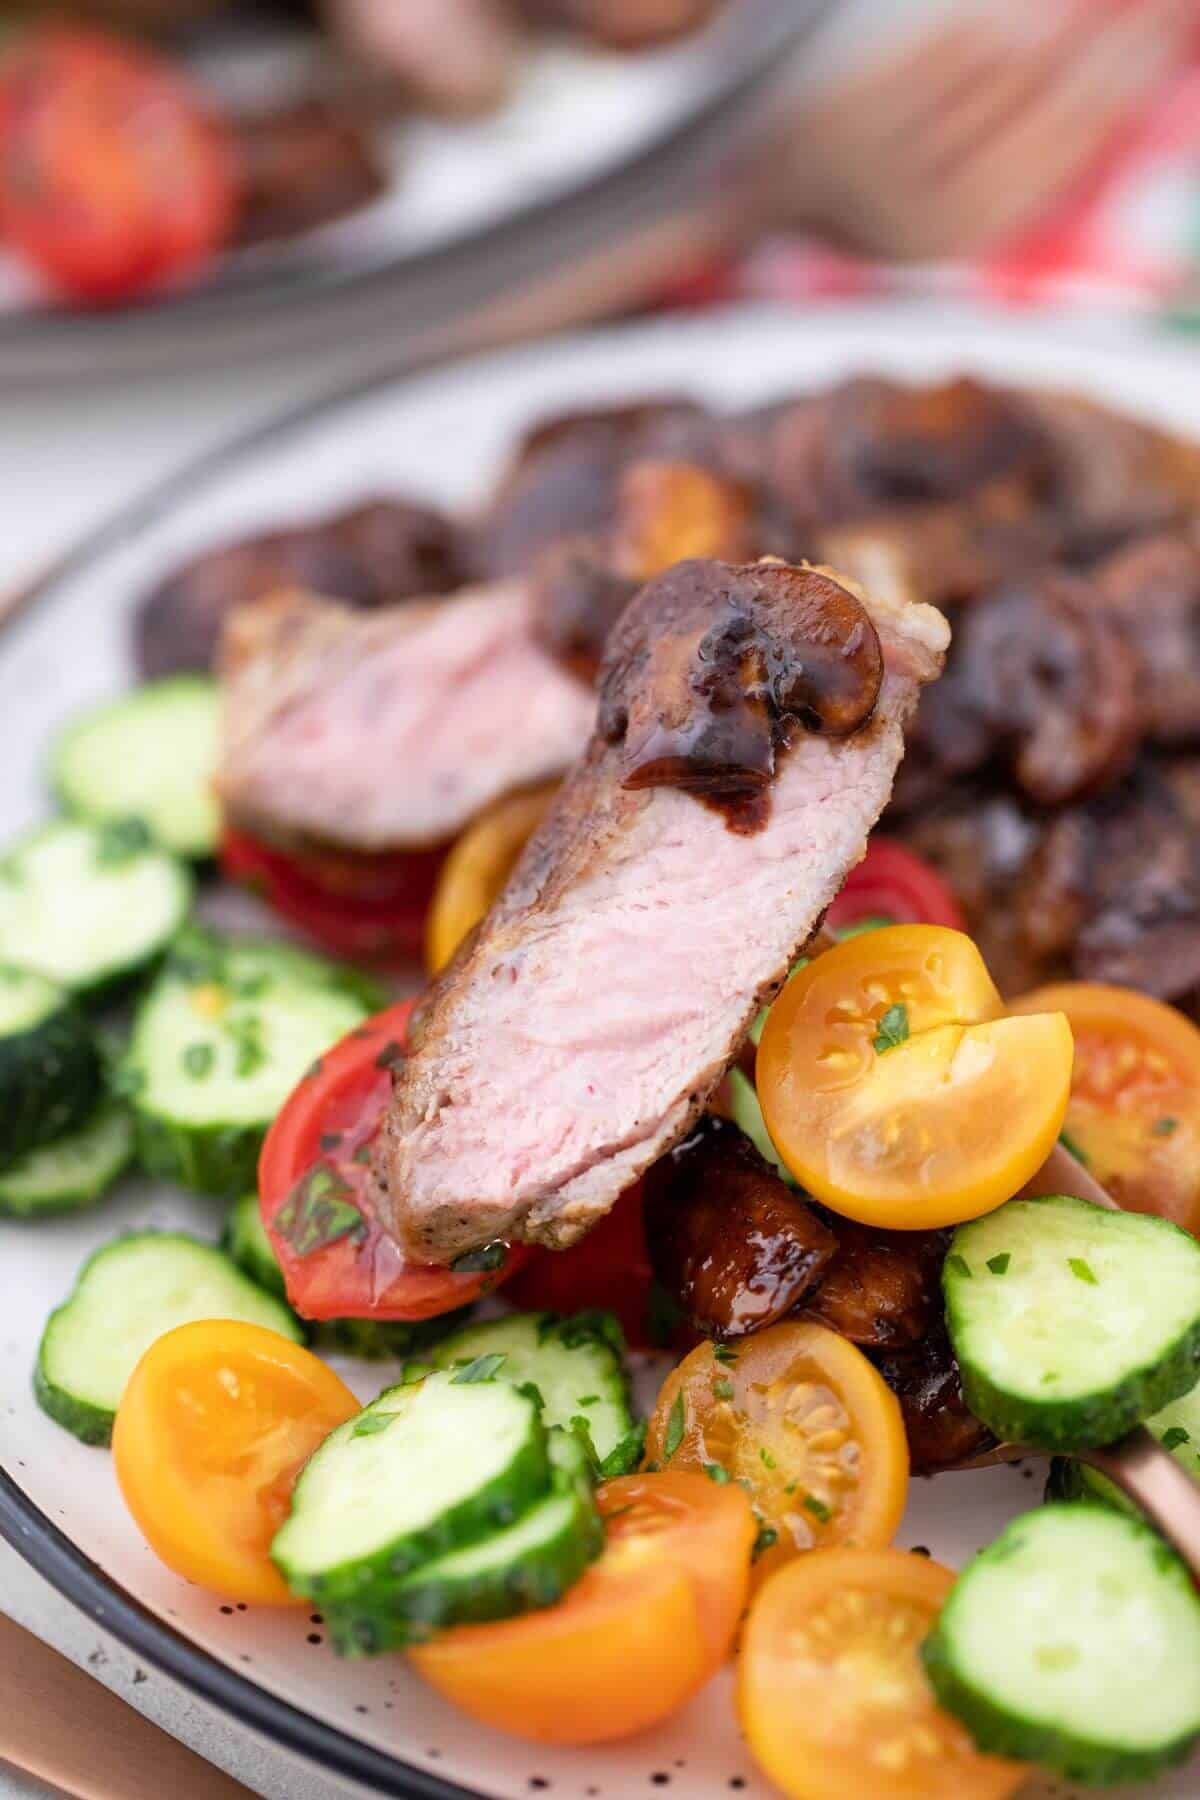 A plate with meat, tomatoes and cucumbers on it.